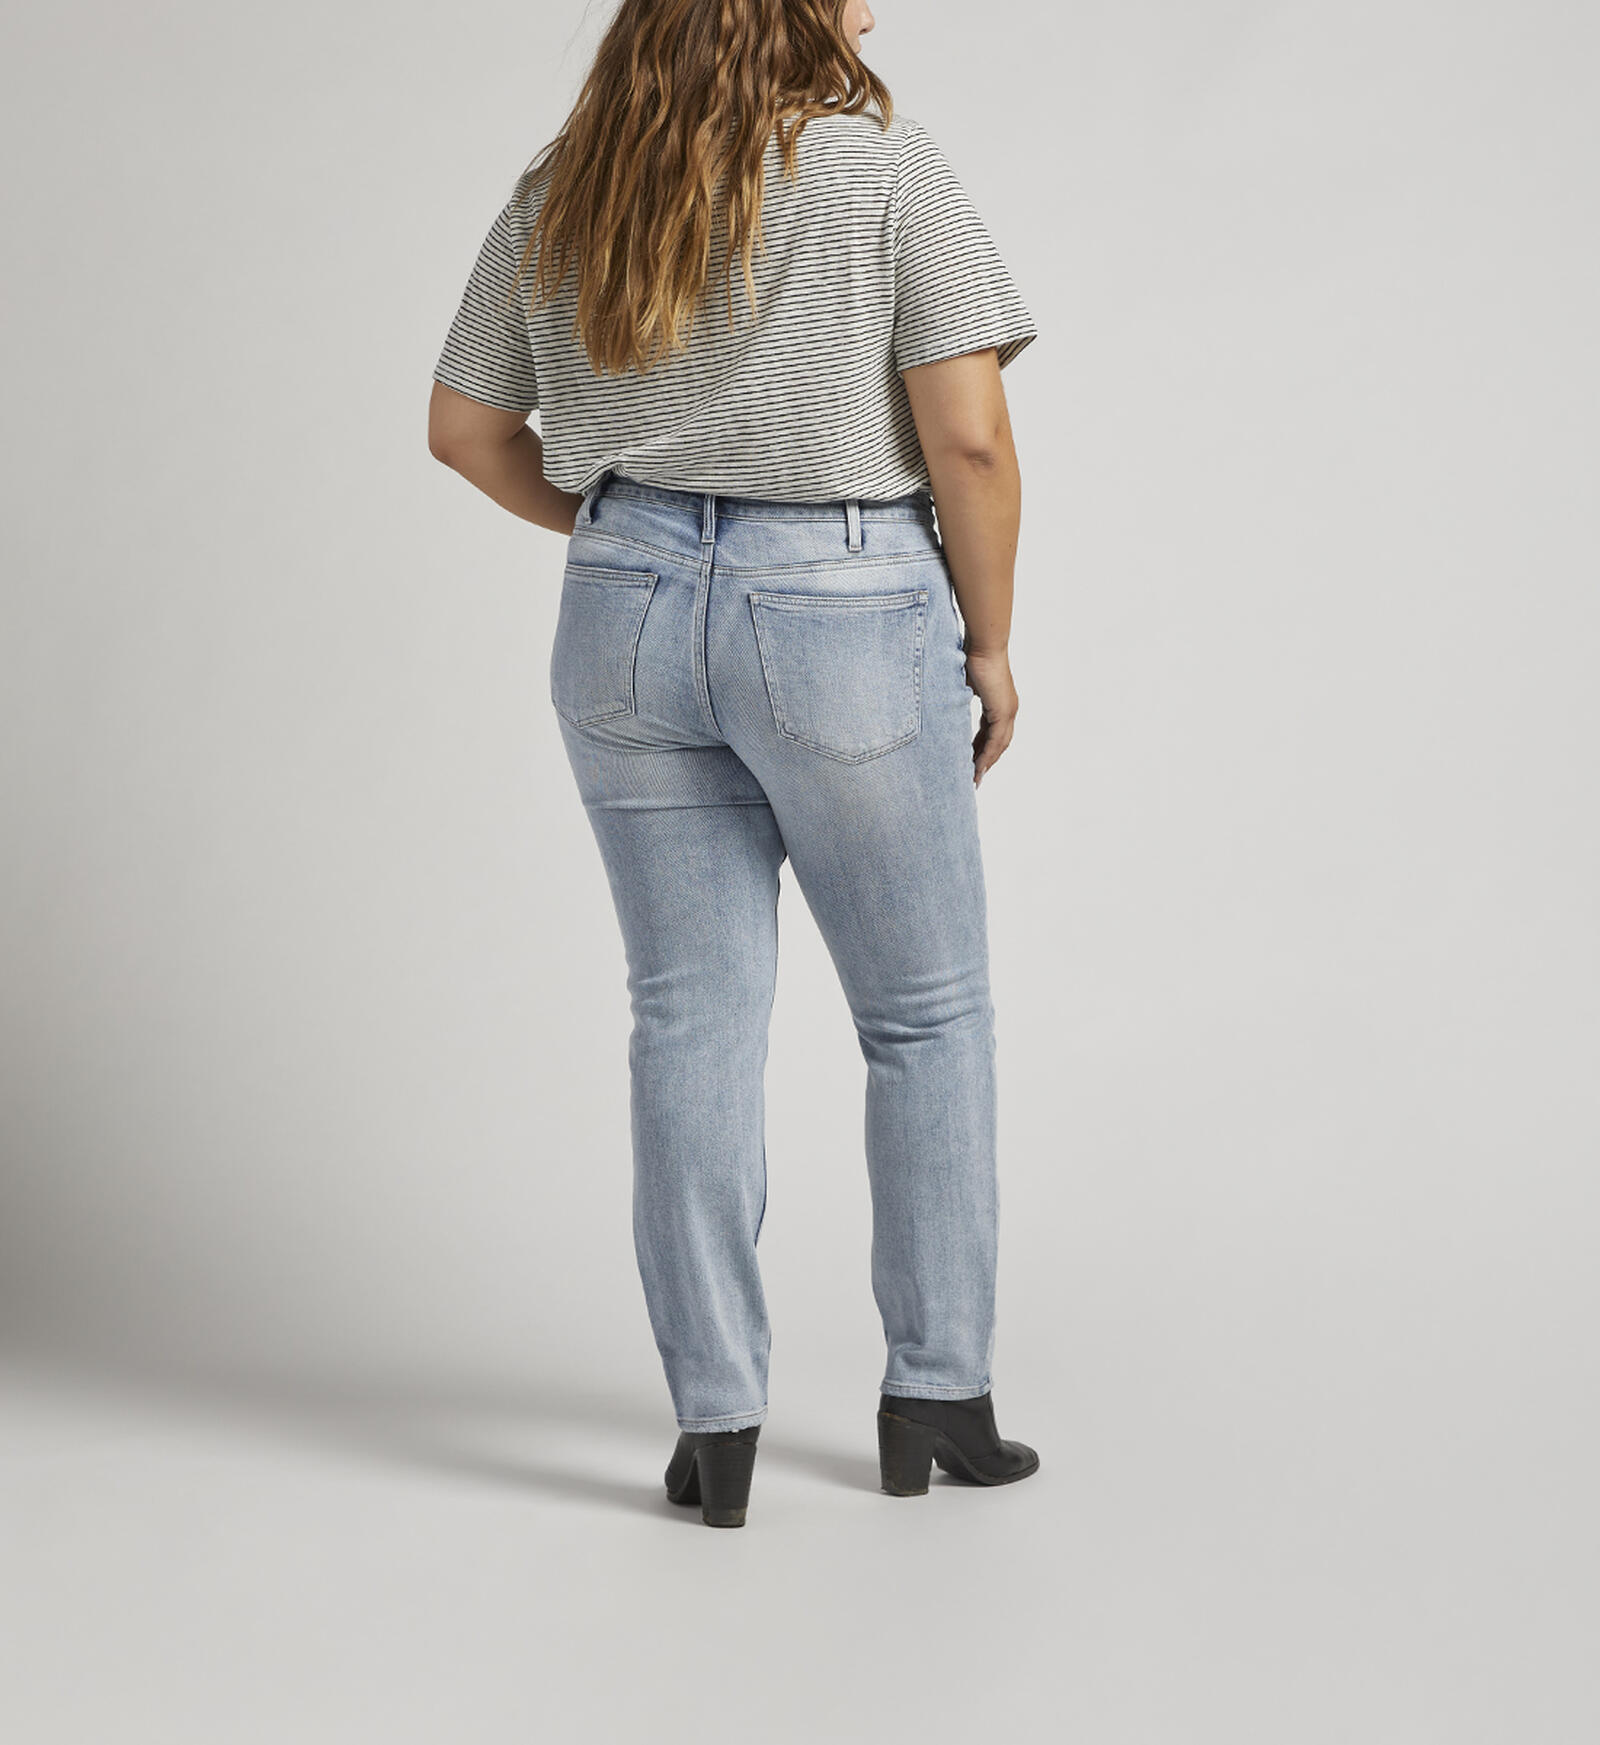 Buy Most Wanted Mid Rise Straight Leg Jeans Plus Size for USD 78.00